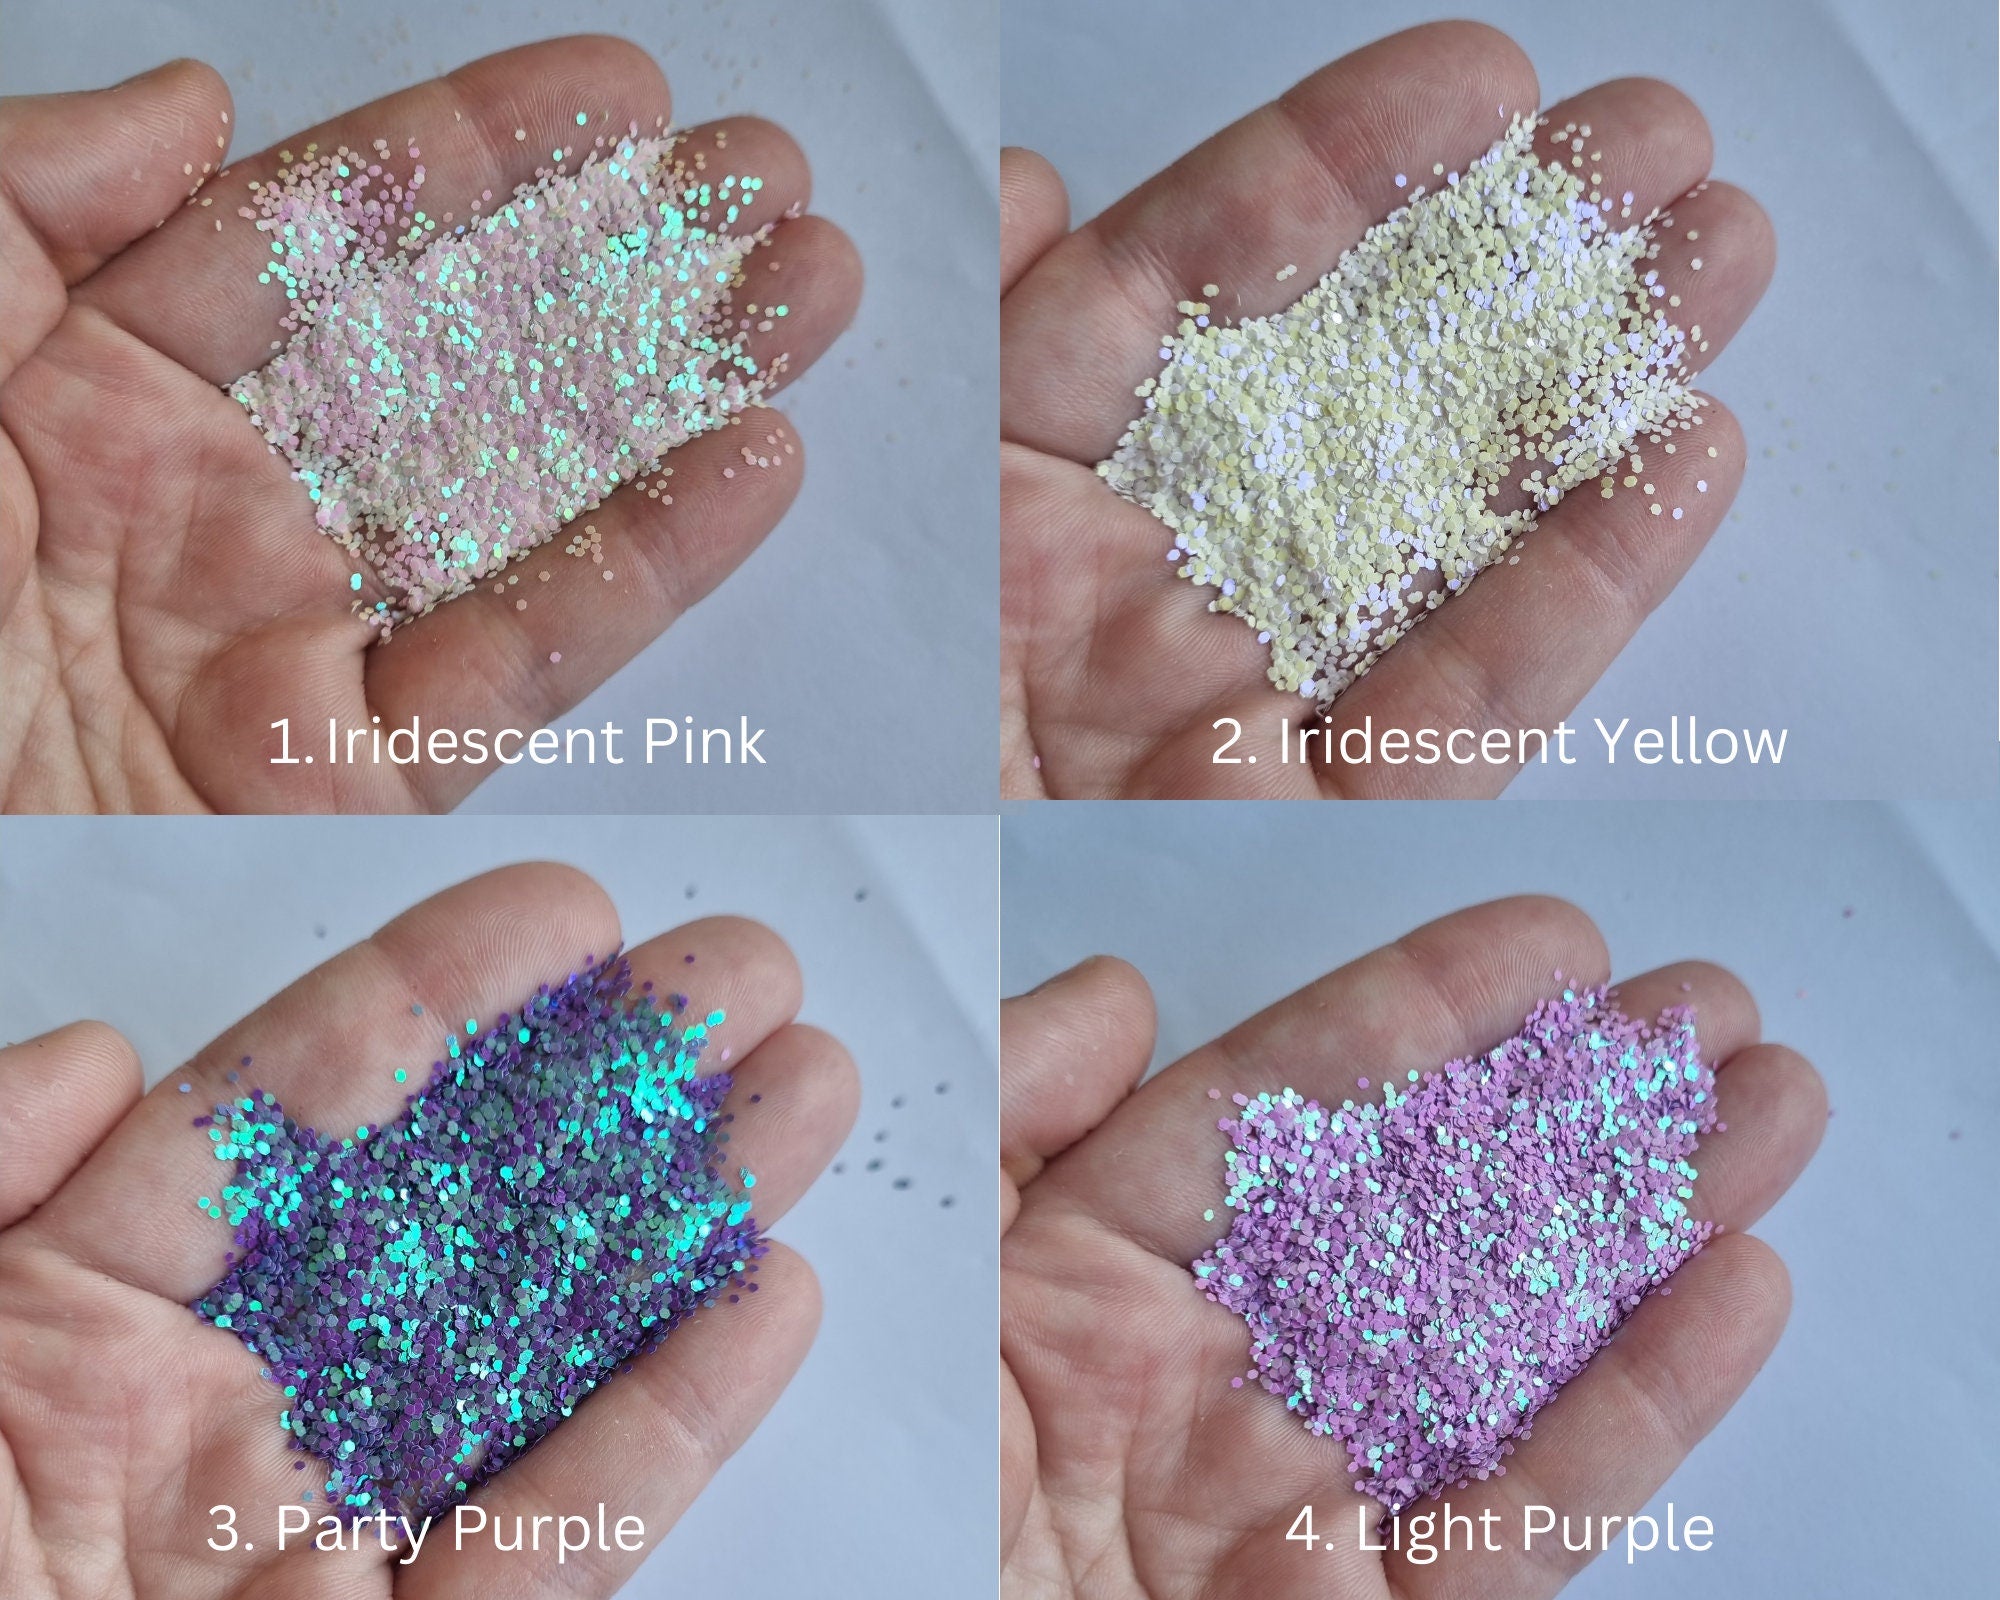 10g Holographic Small 1mm Nail Glitter, Holographic Sequins, Iridescent Mixed Hexagon, Sparkly Body Glitter, Manicure Glitter, Laser glitter